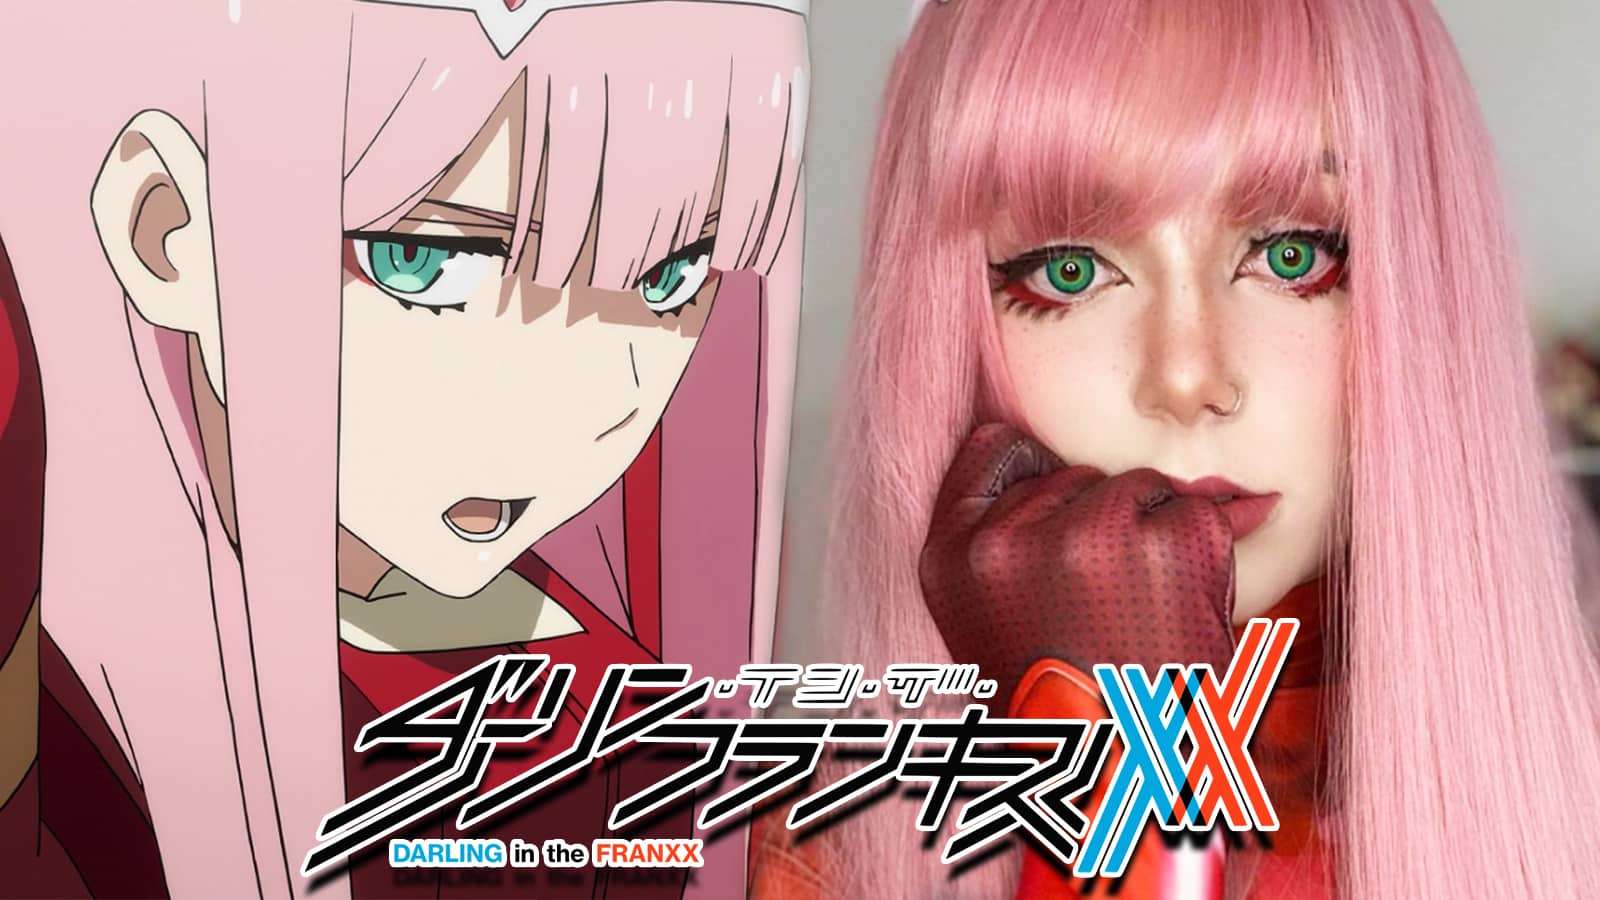 Darling in the Franxx anime Zero Two next to cosplayer